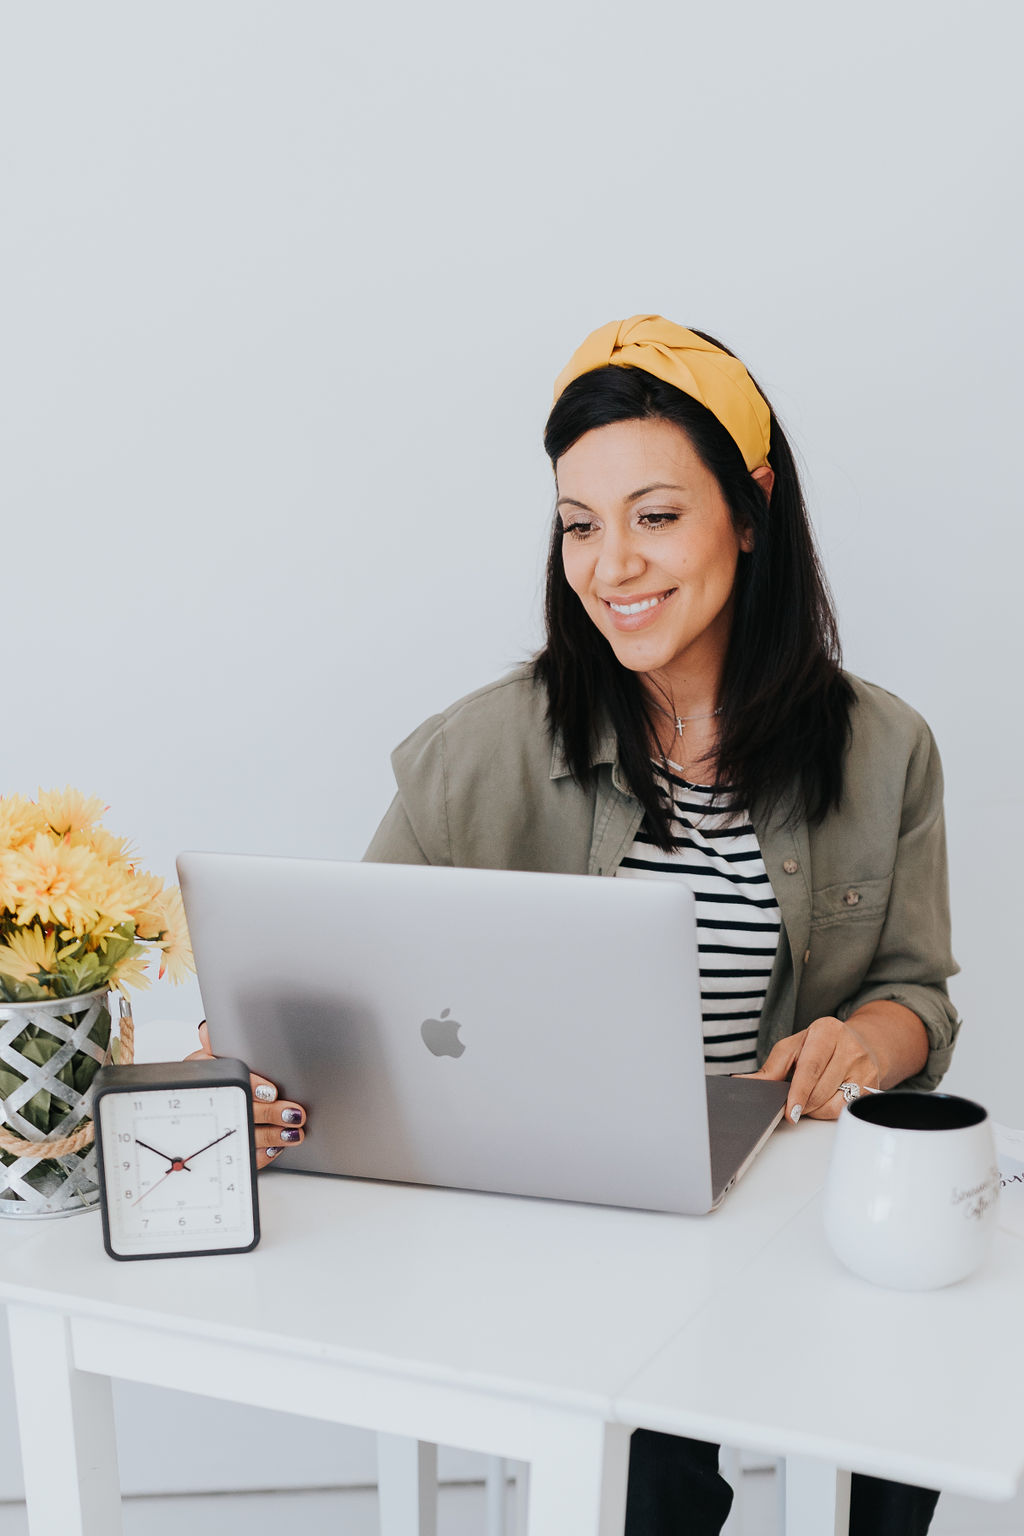 dark haired woman sitting at a desk with her laptop open in front of her. Also on the desk is a vase of yellow flowers, and alarm clock, and a mug of coffee. She is wearing a yellow headband and a black and white striped shirt.